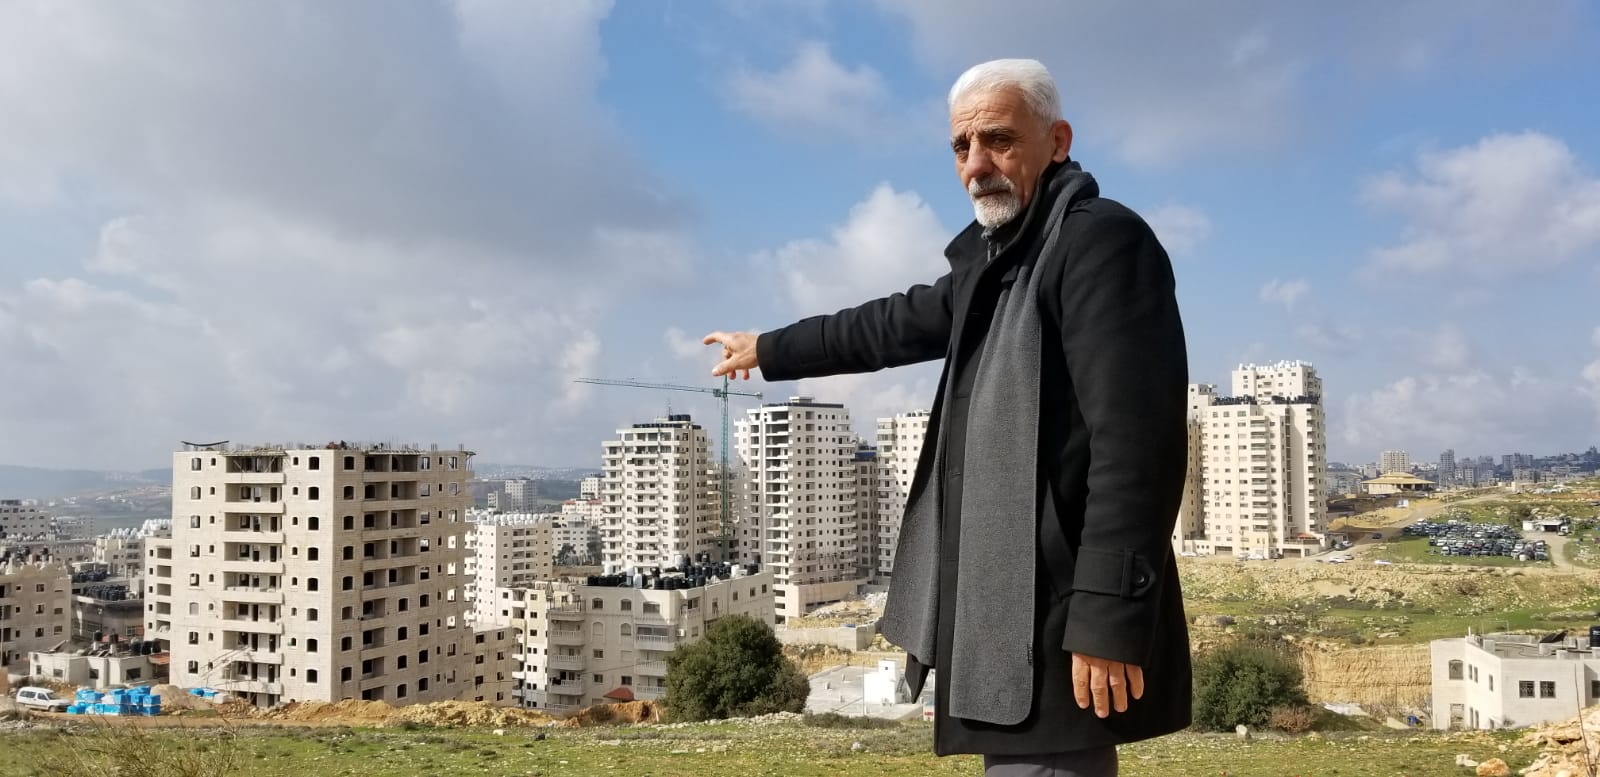 Munir Zughayer, an activist who leads a committee that frequently complains to the Jerusalem Municipality about the state of services in Kafr Aqab, points to a number of buildings that were built in contravention of regulations on February 20, 2019. (Adam Rasgon/Times of Israel)